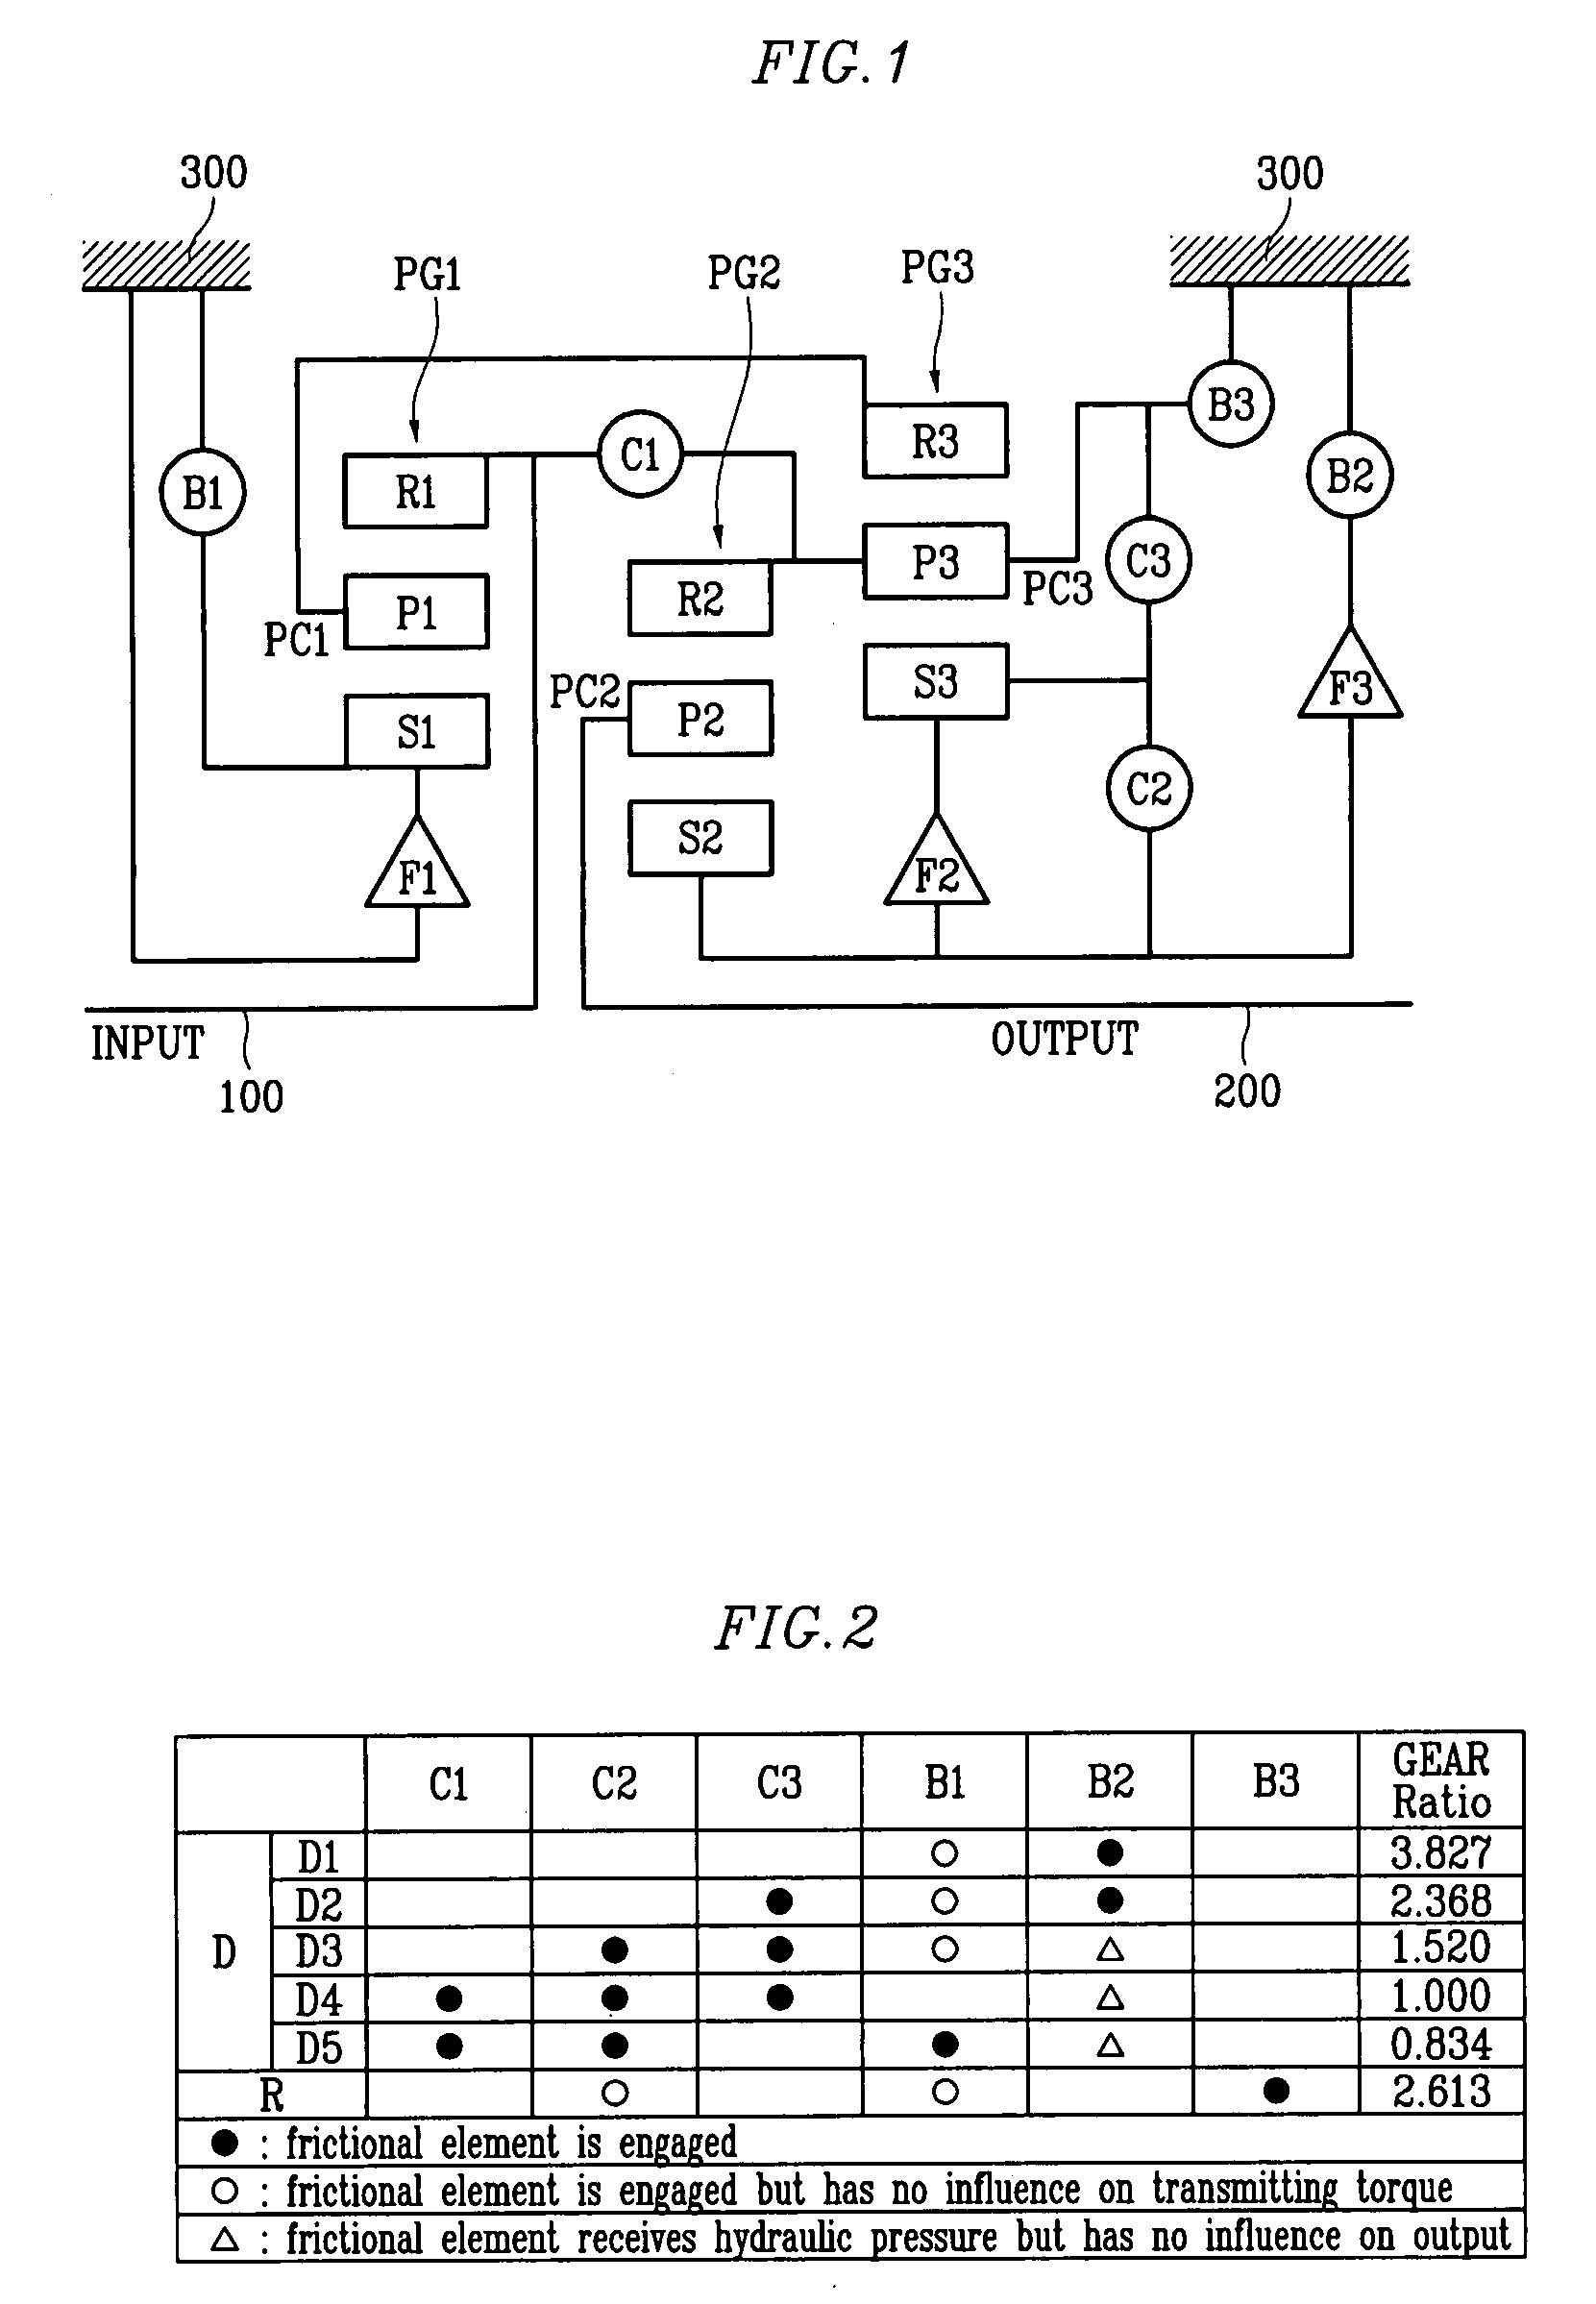 Method for controlling shift during shift of automatic transmission